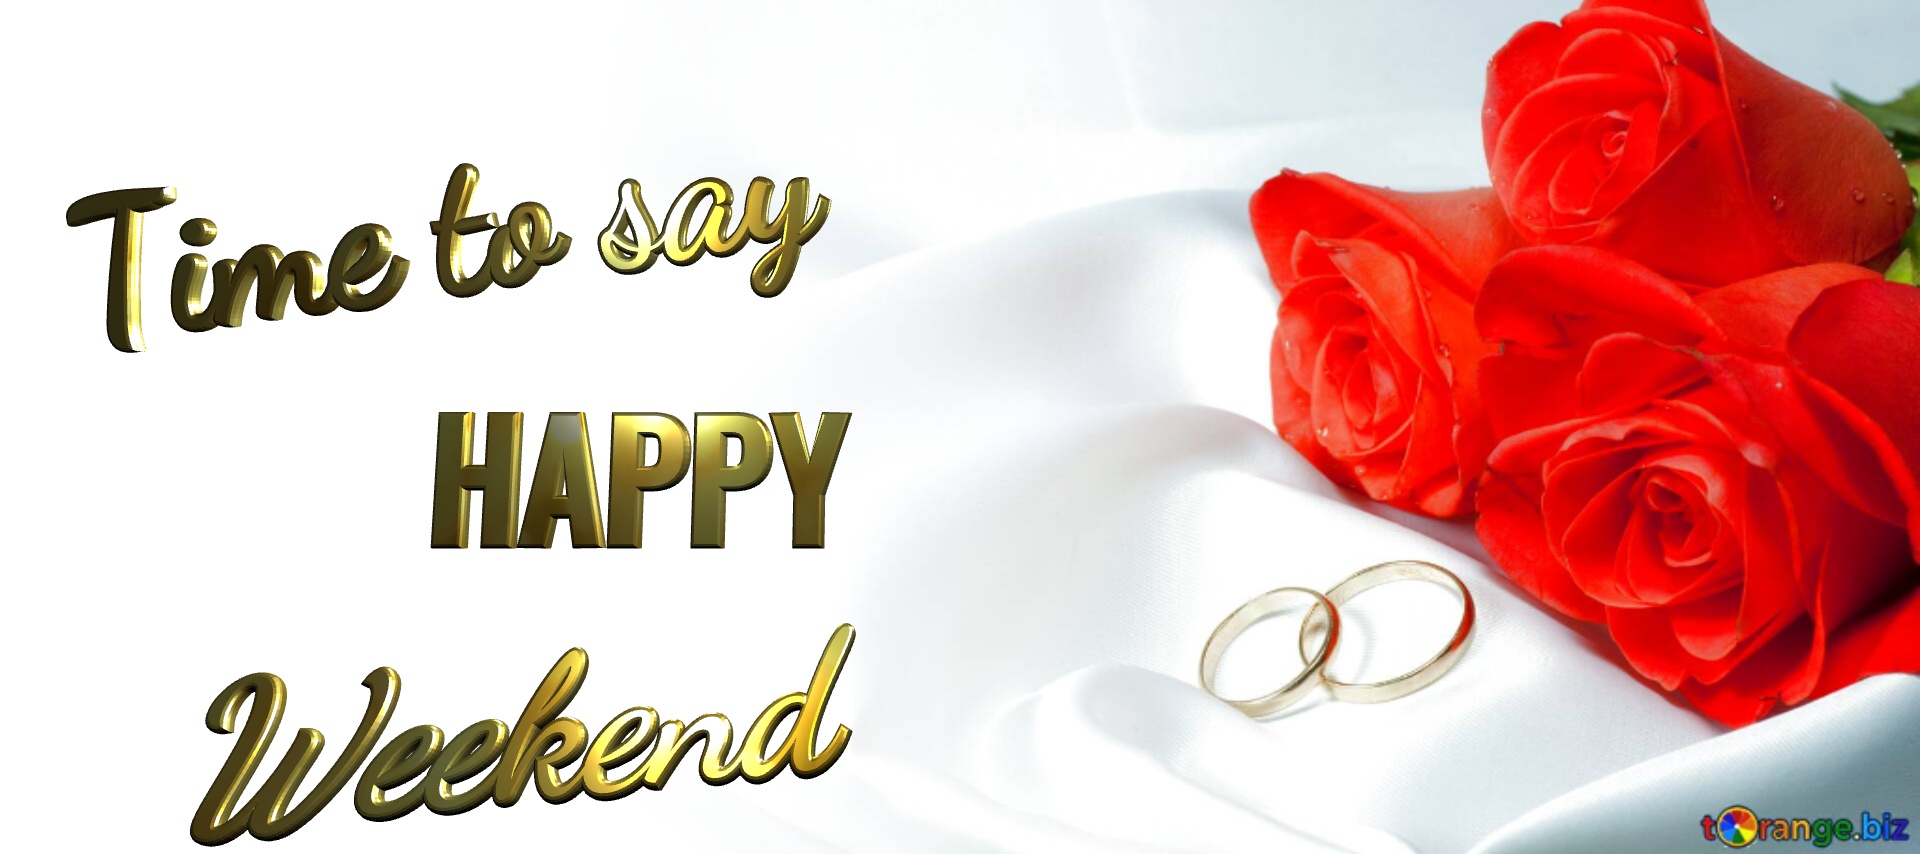 HAPPY Time to say Weekend  Invitation wedding background №0